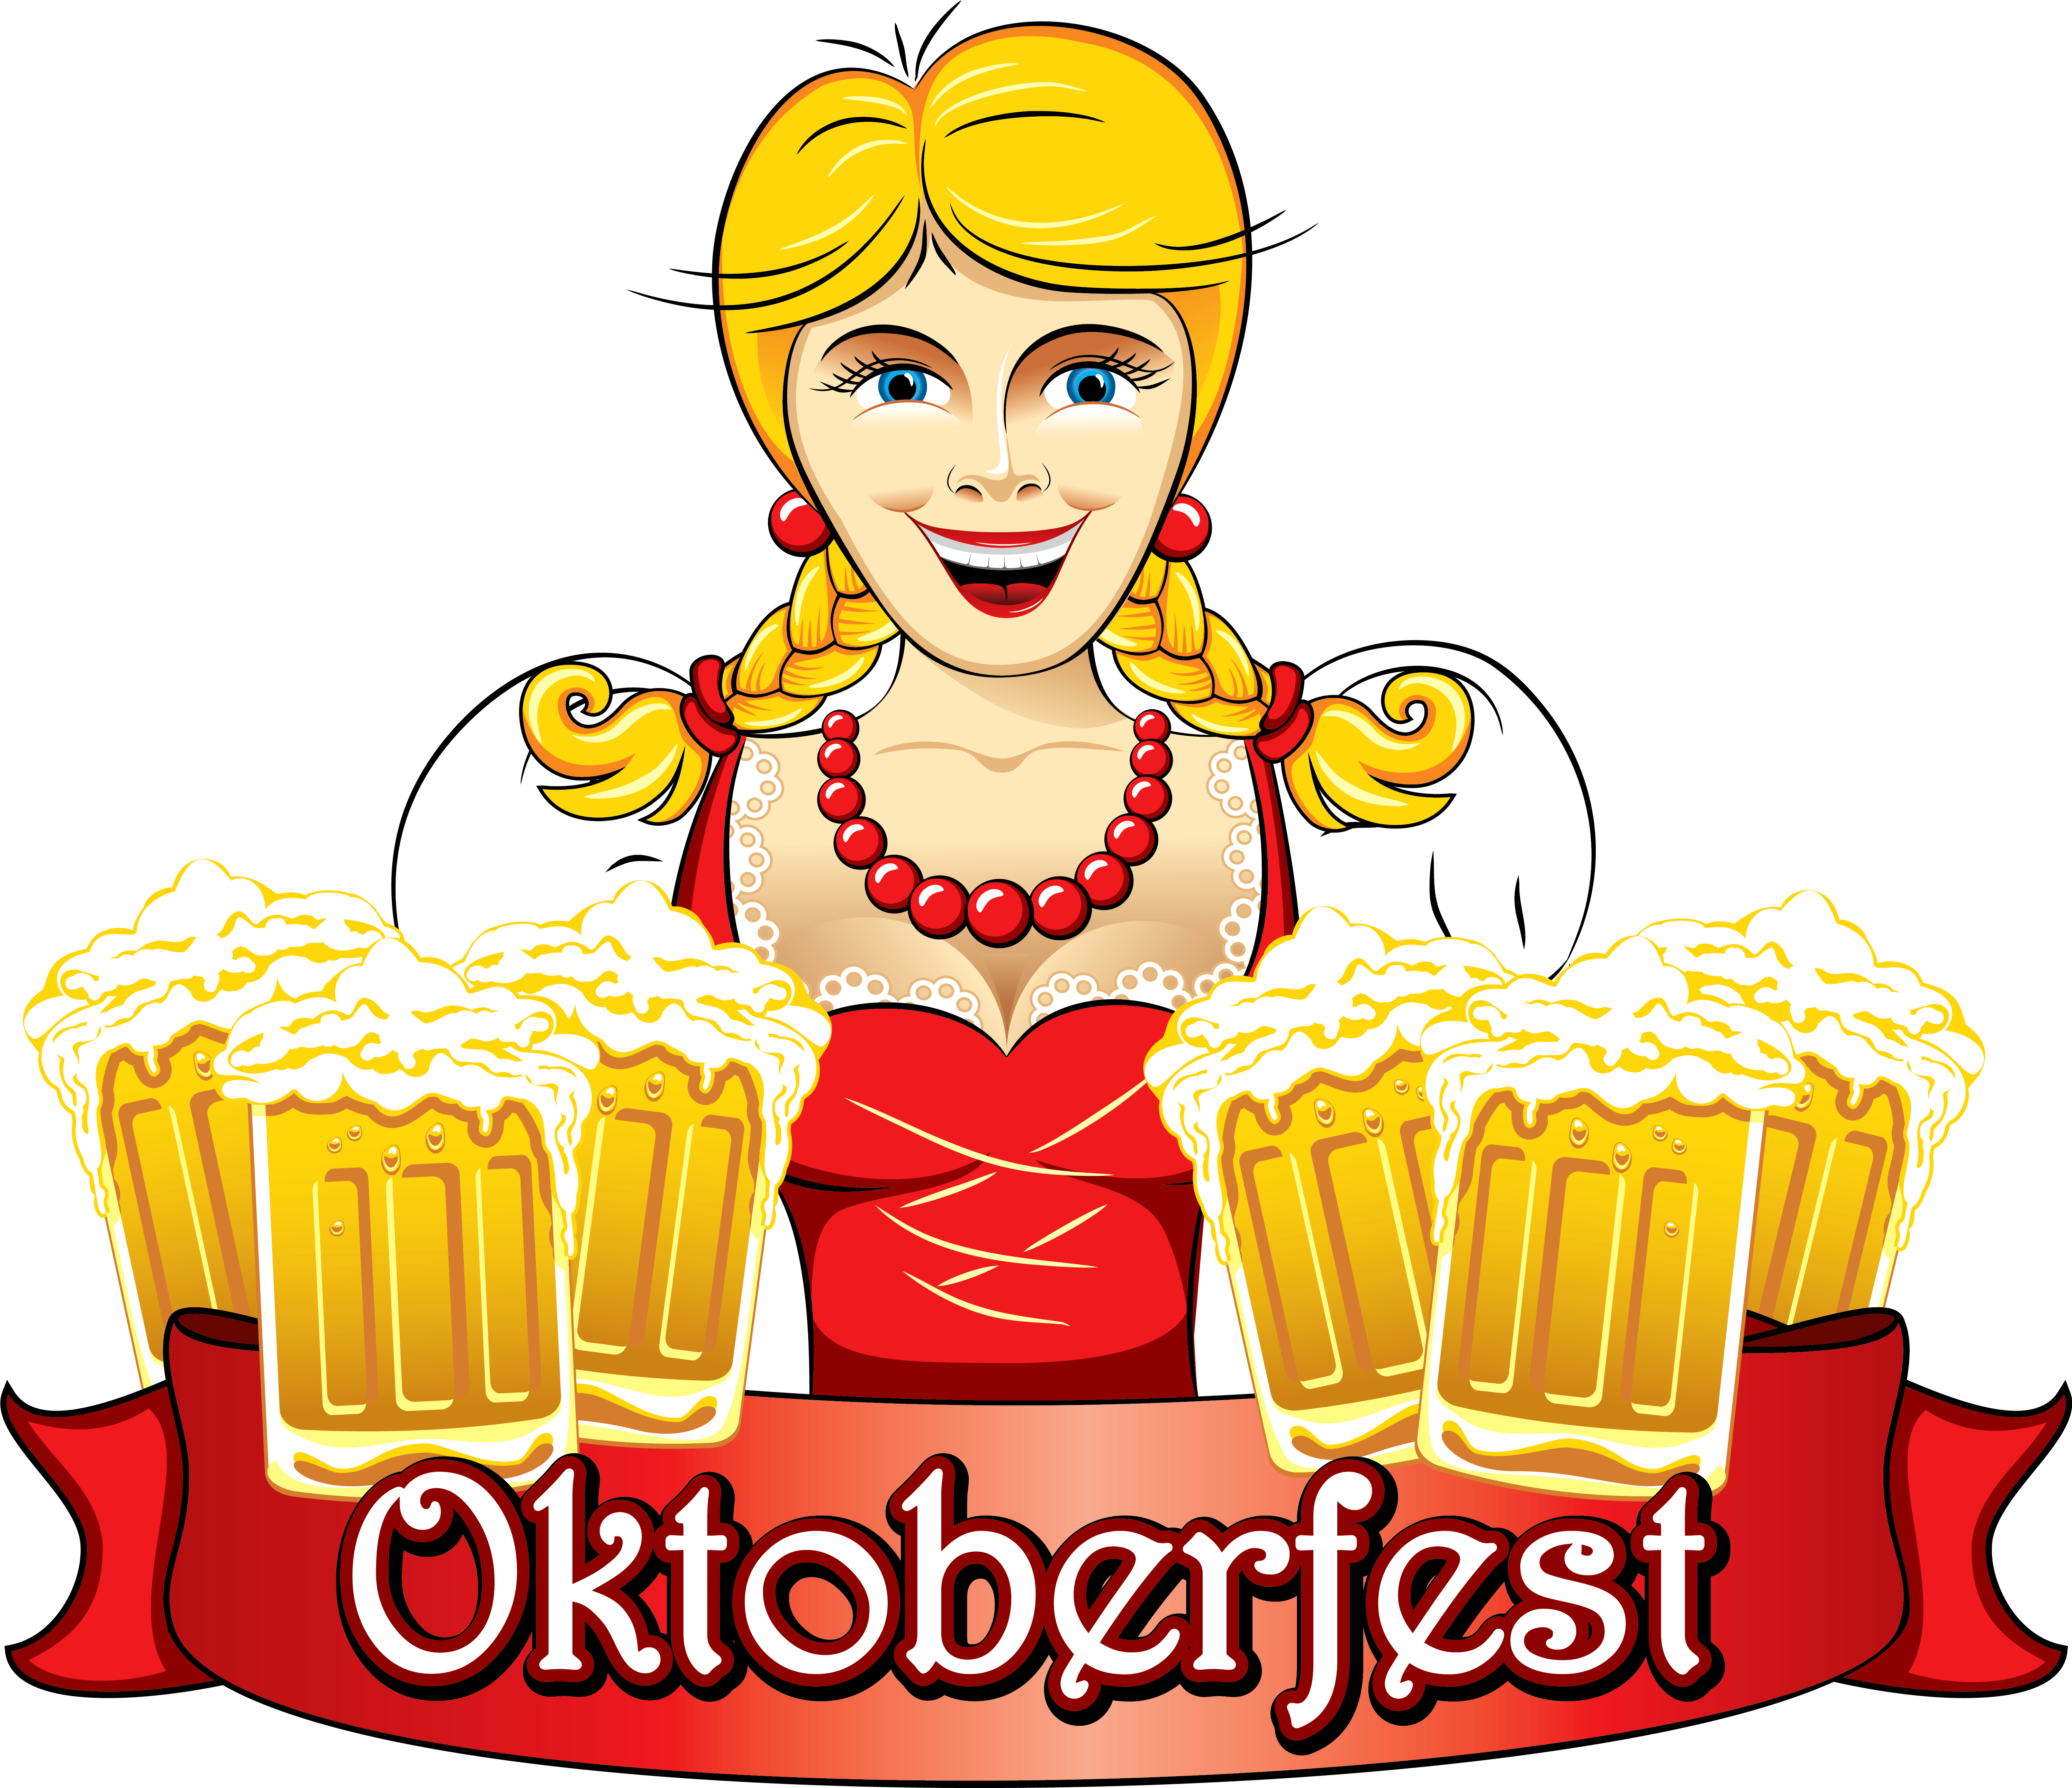 A Cartoon Of A Woman With A Red Dress And A Red Ribbon With Beer PNG